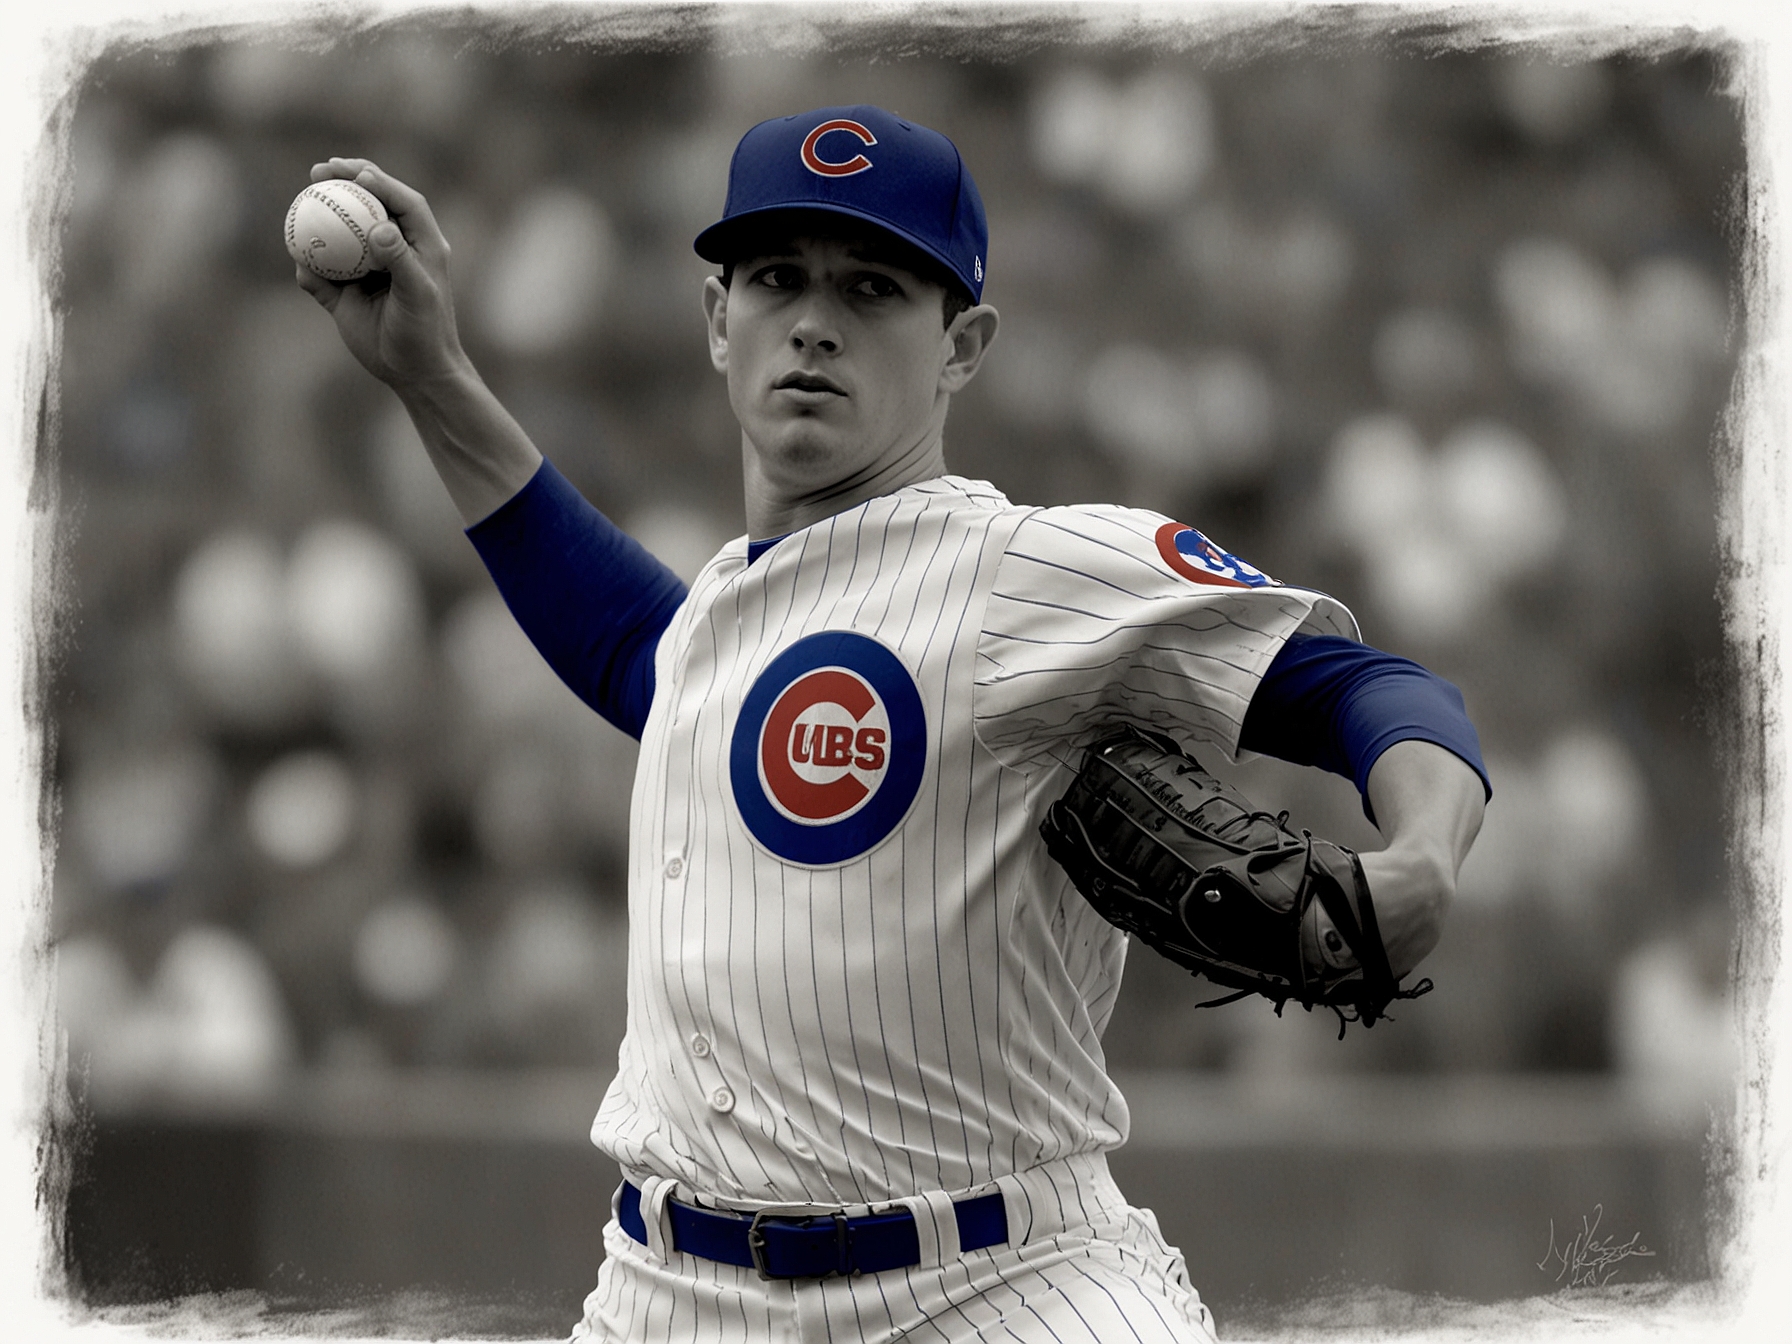 Chicago Cubs' pitcher Kyle Hendricks winds up for a crucial pitch against the San Francisco Giants. The focus is evident as the team's playoff hopes hang in balance during this pivotal game.